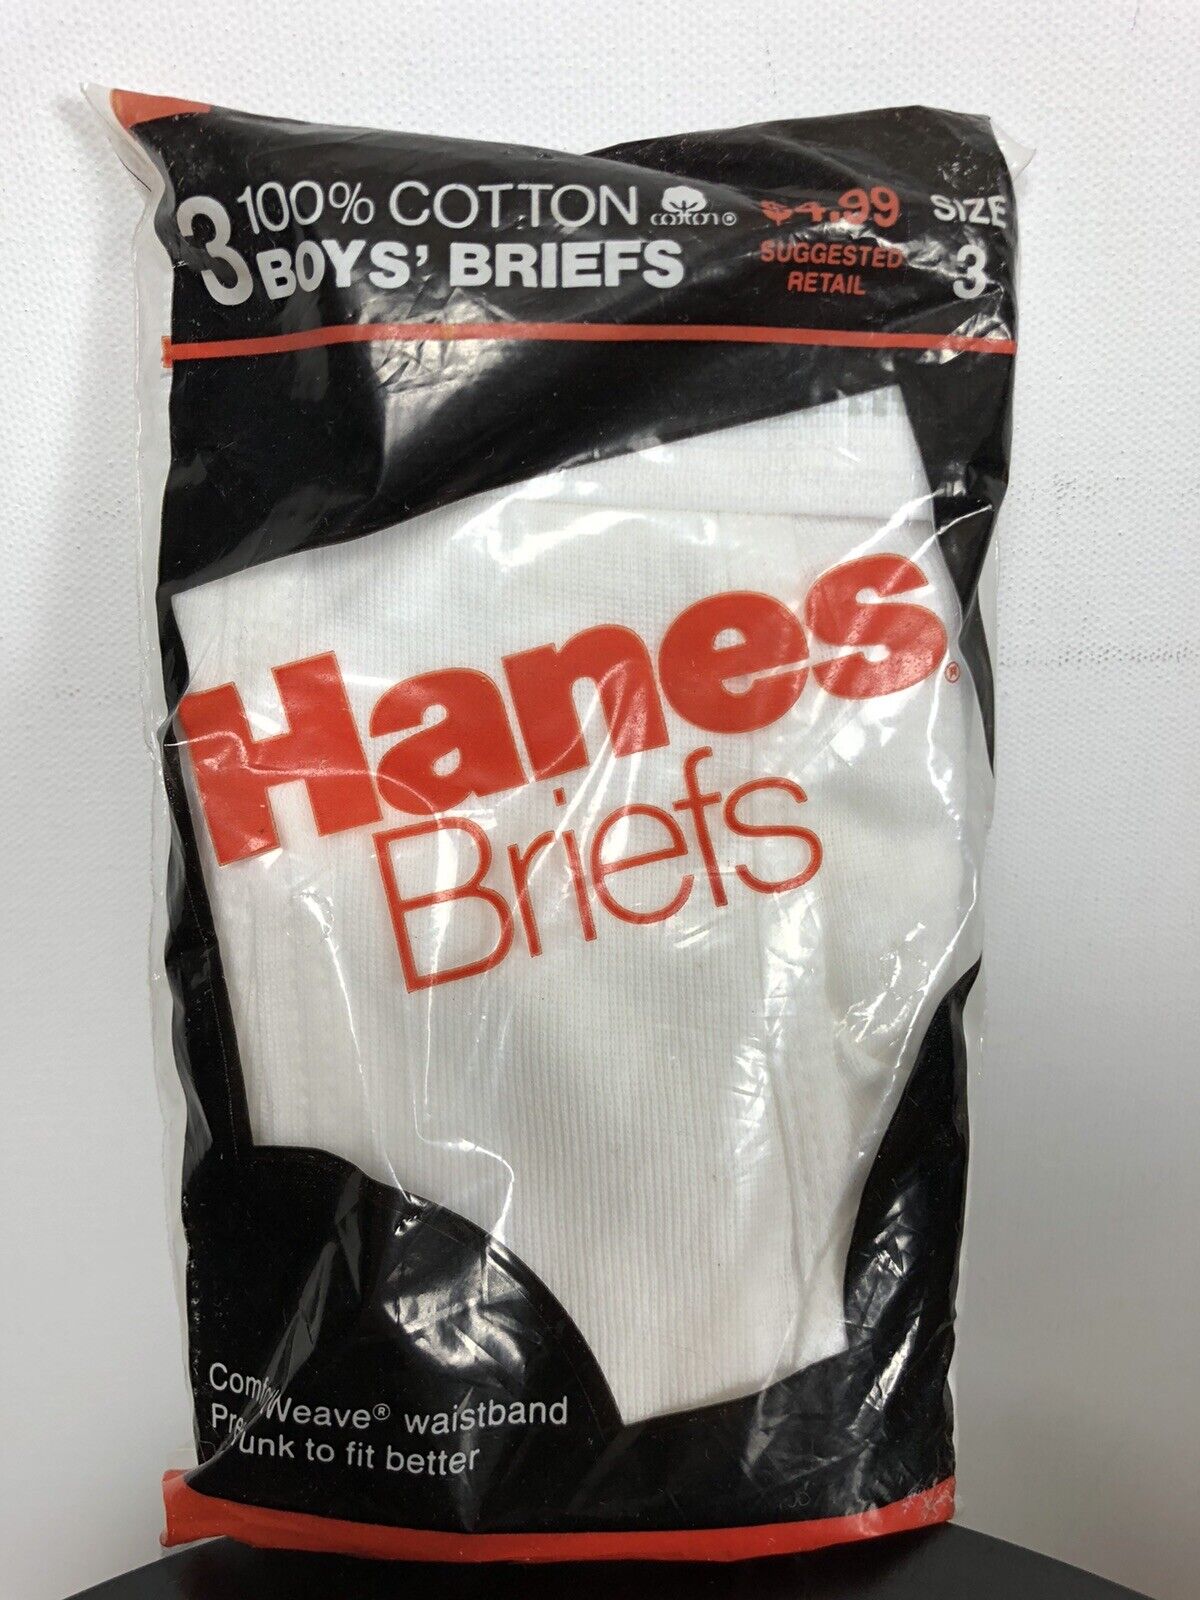 1987 Max 72% OFF 3 San Francisco Mall Pack Hanes Boys Briefs New Old Cotton Stock sz Vintage